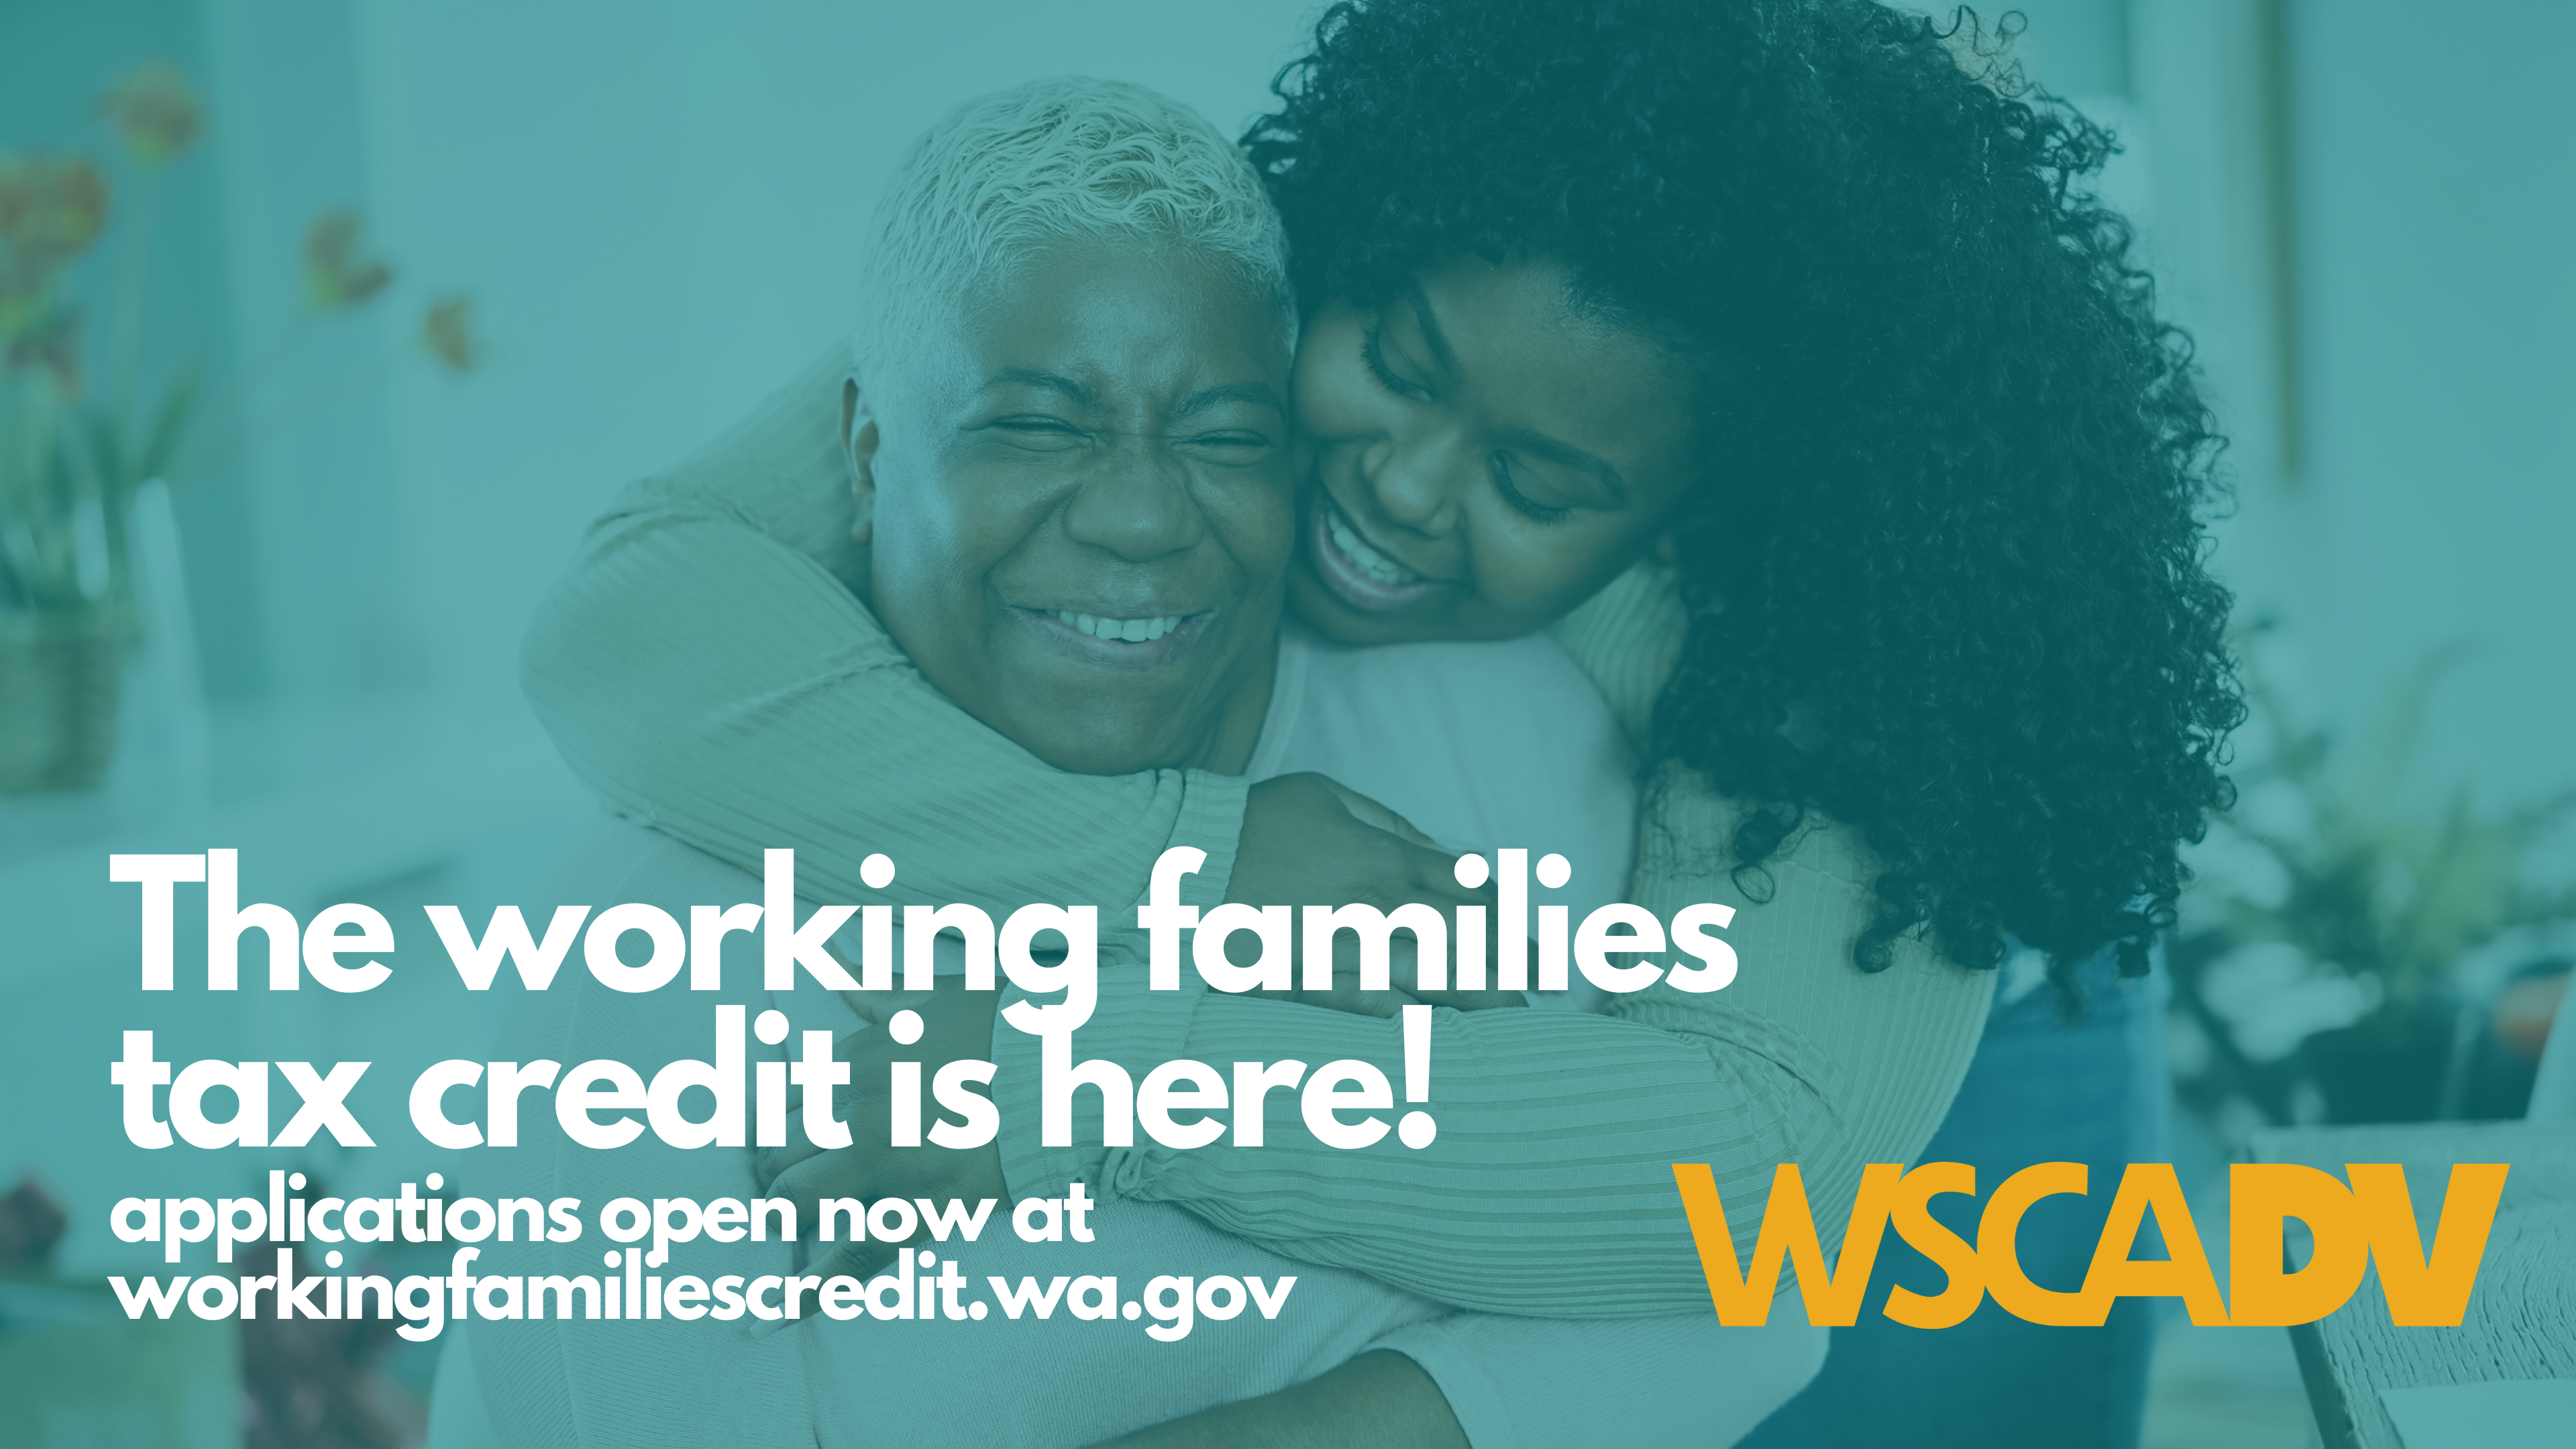 A Black grandmother and granddaughter embrace and smile. Text reads "The working families tax credit is here! Applications open now." Gold WSCADV logo is in lower right corner.